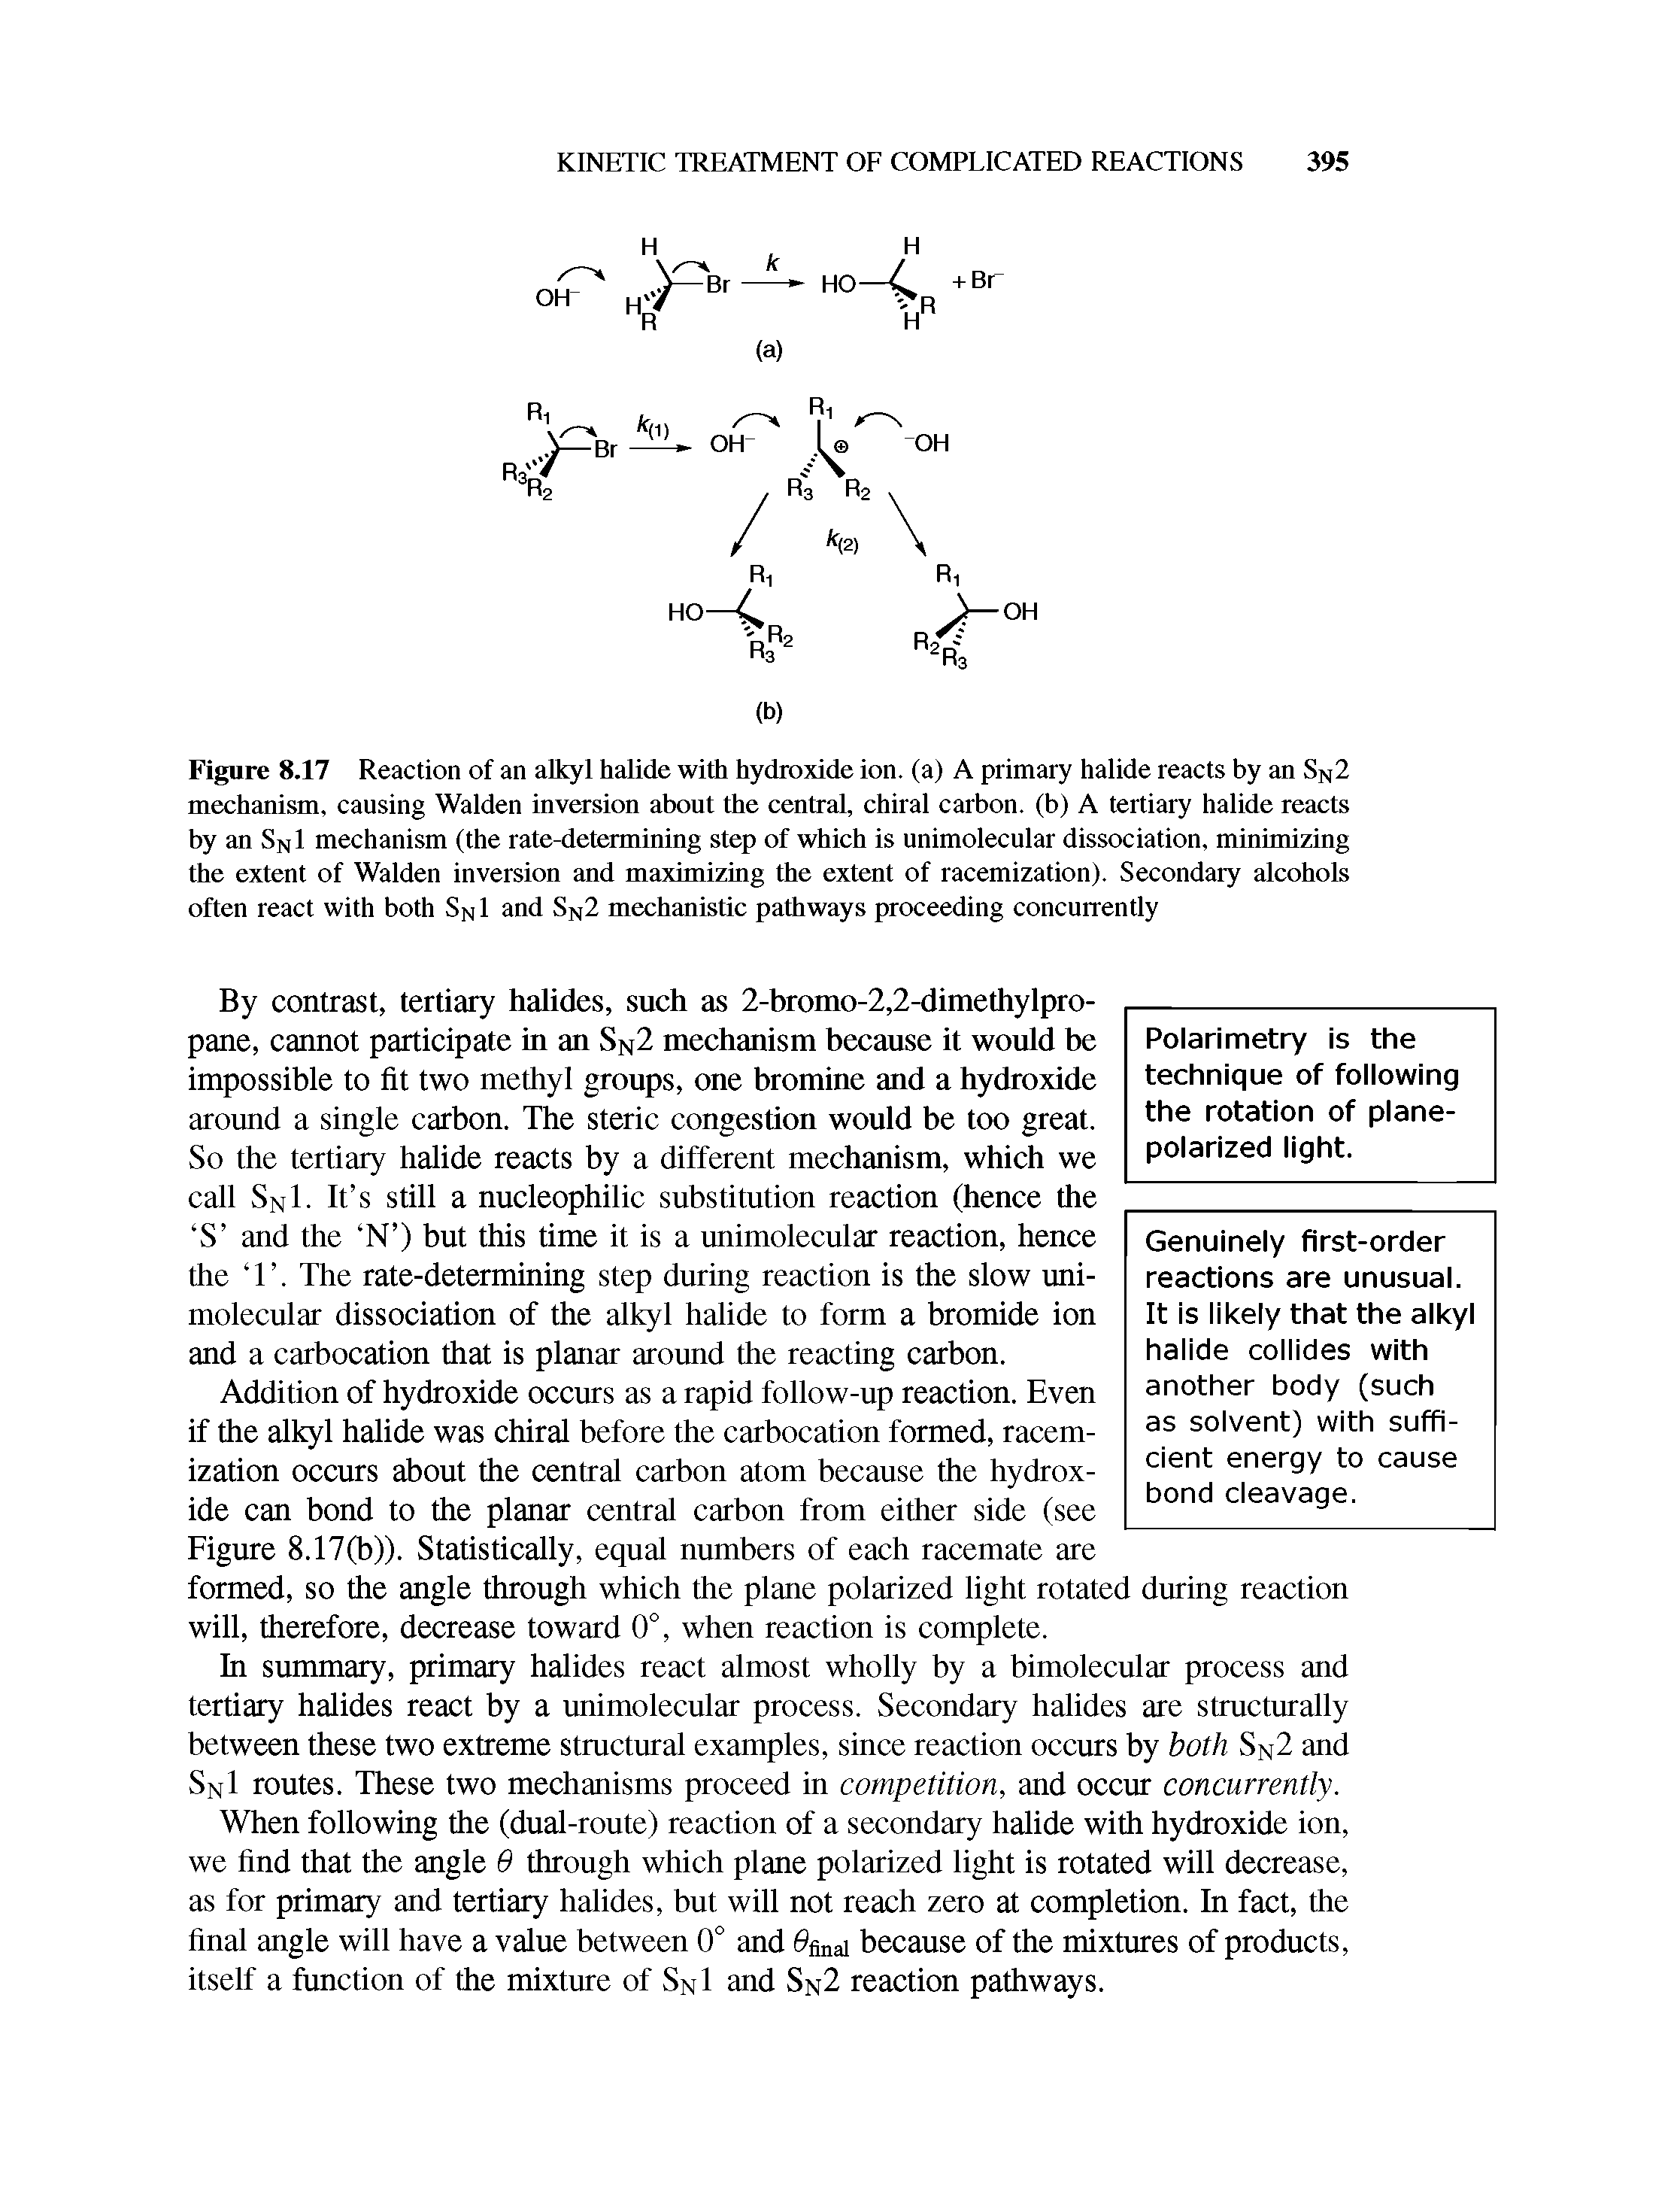 Figure 8.17 Reaction of an alkyl halide with hydroxide ion. (a) A primary halide reacts by an SN2 mechanism, causing Walden inversion about the central, chiral carbon, (b) A tertiary halide reacts by an SN1 mechanism (the rate-determining step of which is unimolecular dissociation, minimizing the extent of Walden inversion and maximizing the extent of racemization). Secondary alcohols often react with both Sn 1 and SN2 mechanistic pathways proceeding concurrently...